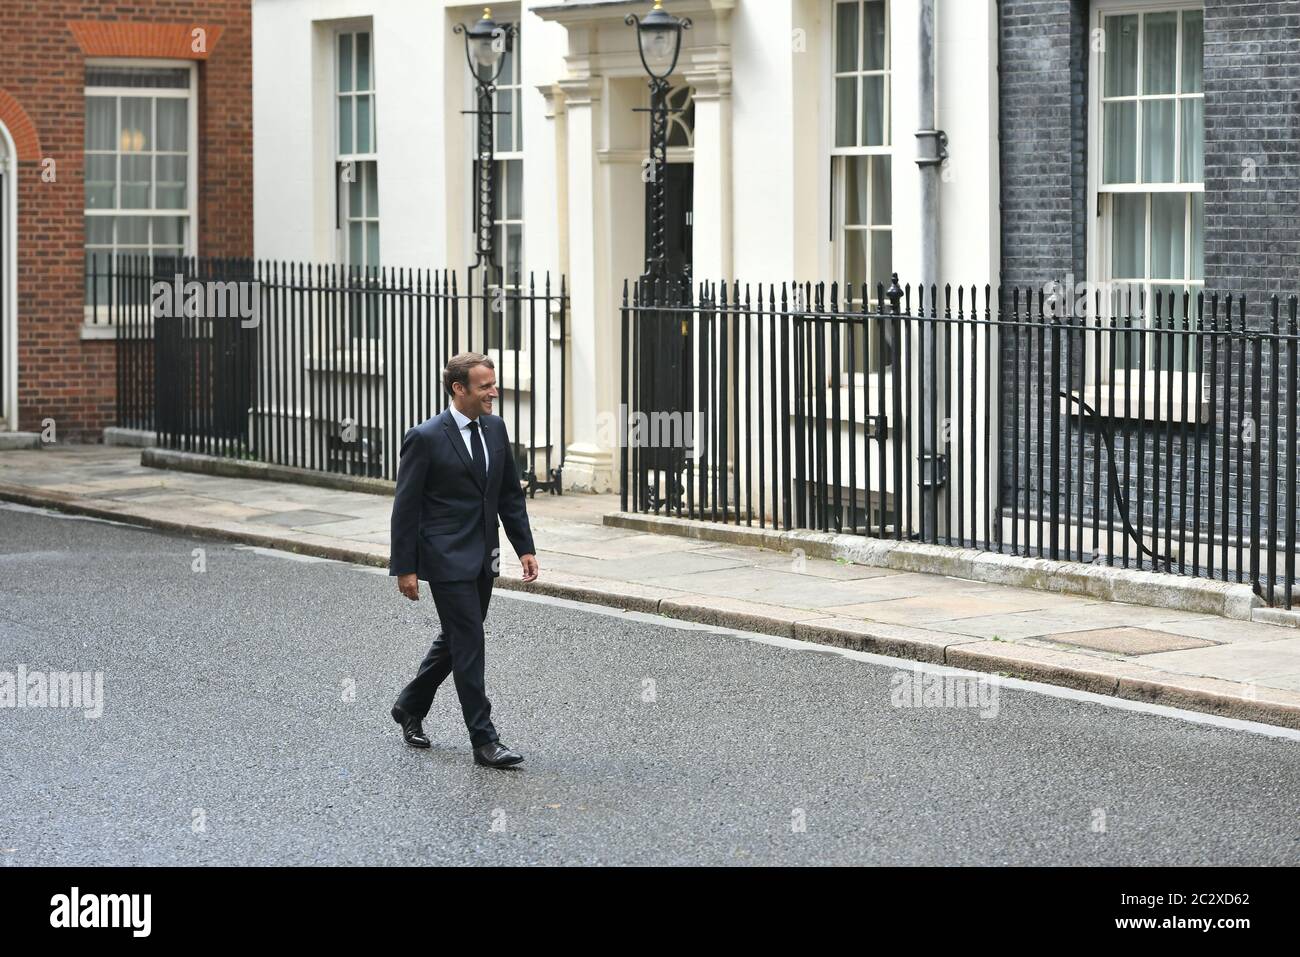 French president Emmanuel Macron arrives in Downing Street in London during his visit to the UK. Stock Photo